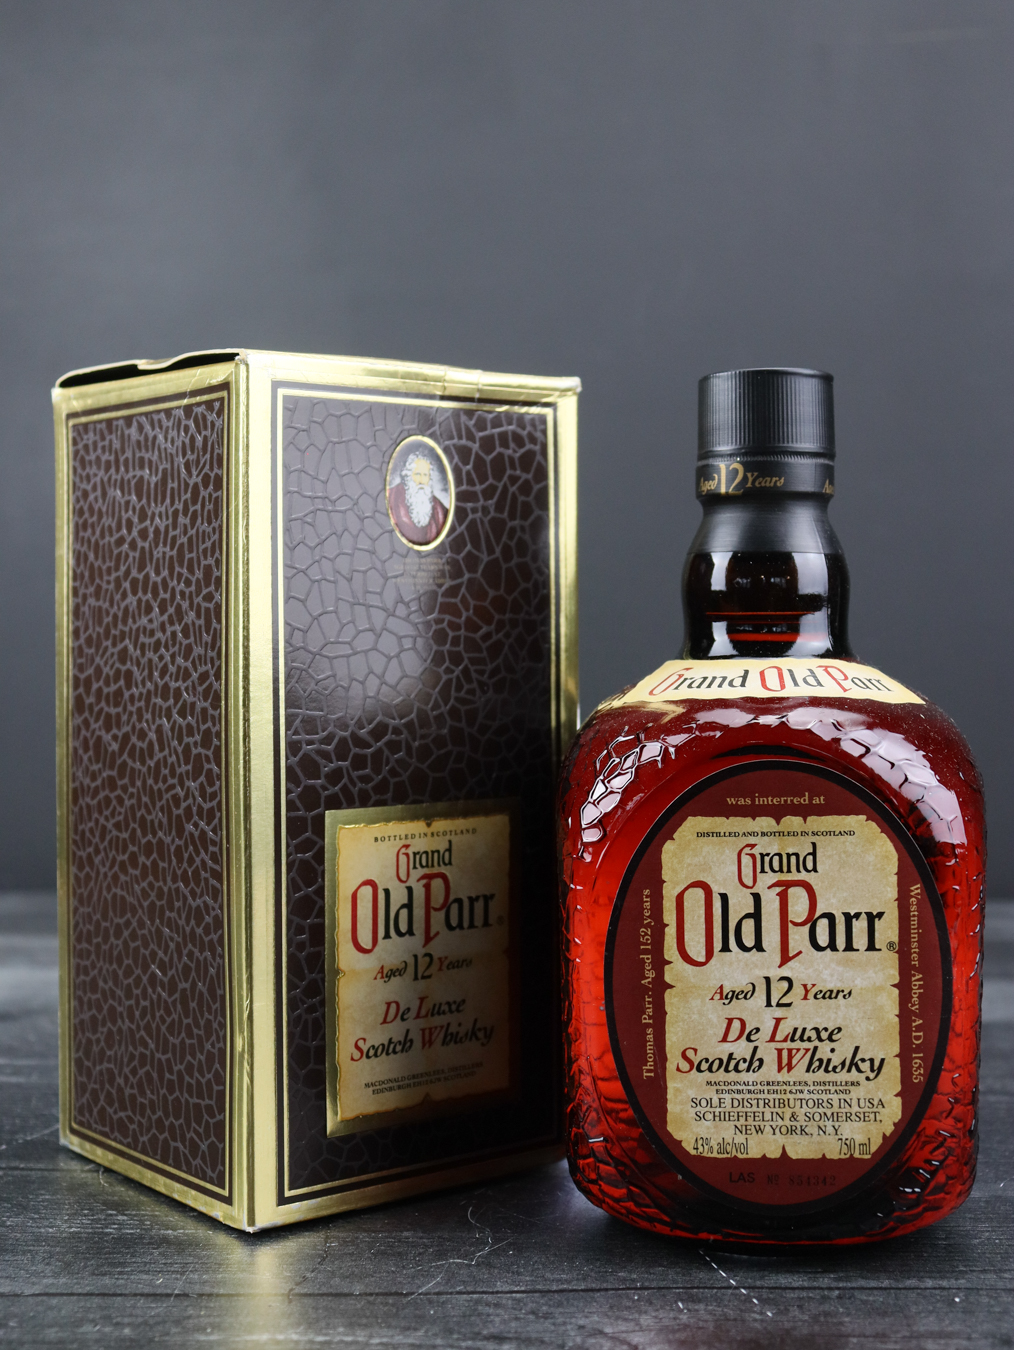 Grand Old Parr 12 Year 'De Luxe' Scotch Whisky | Unicorn Auctions